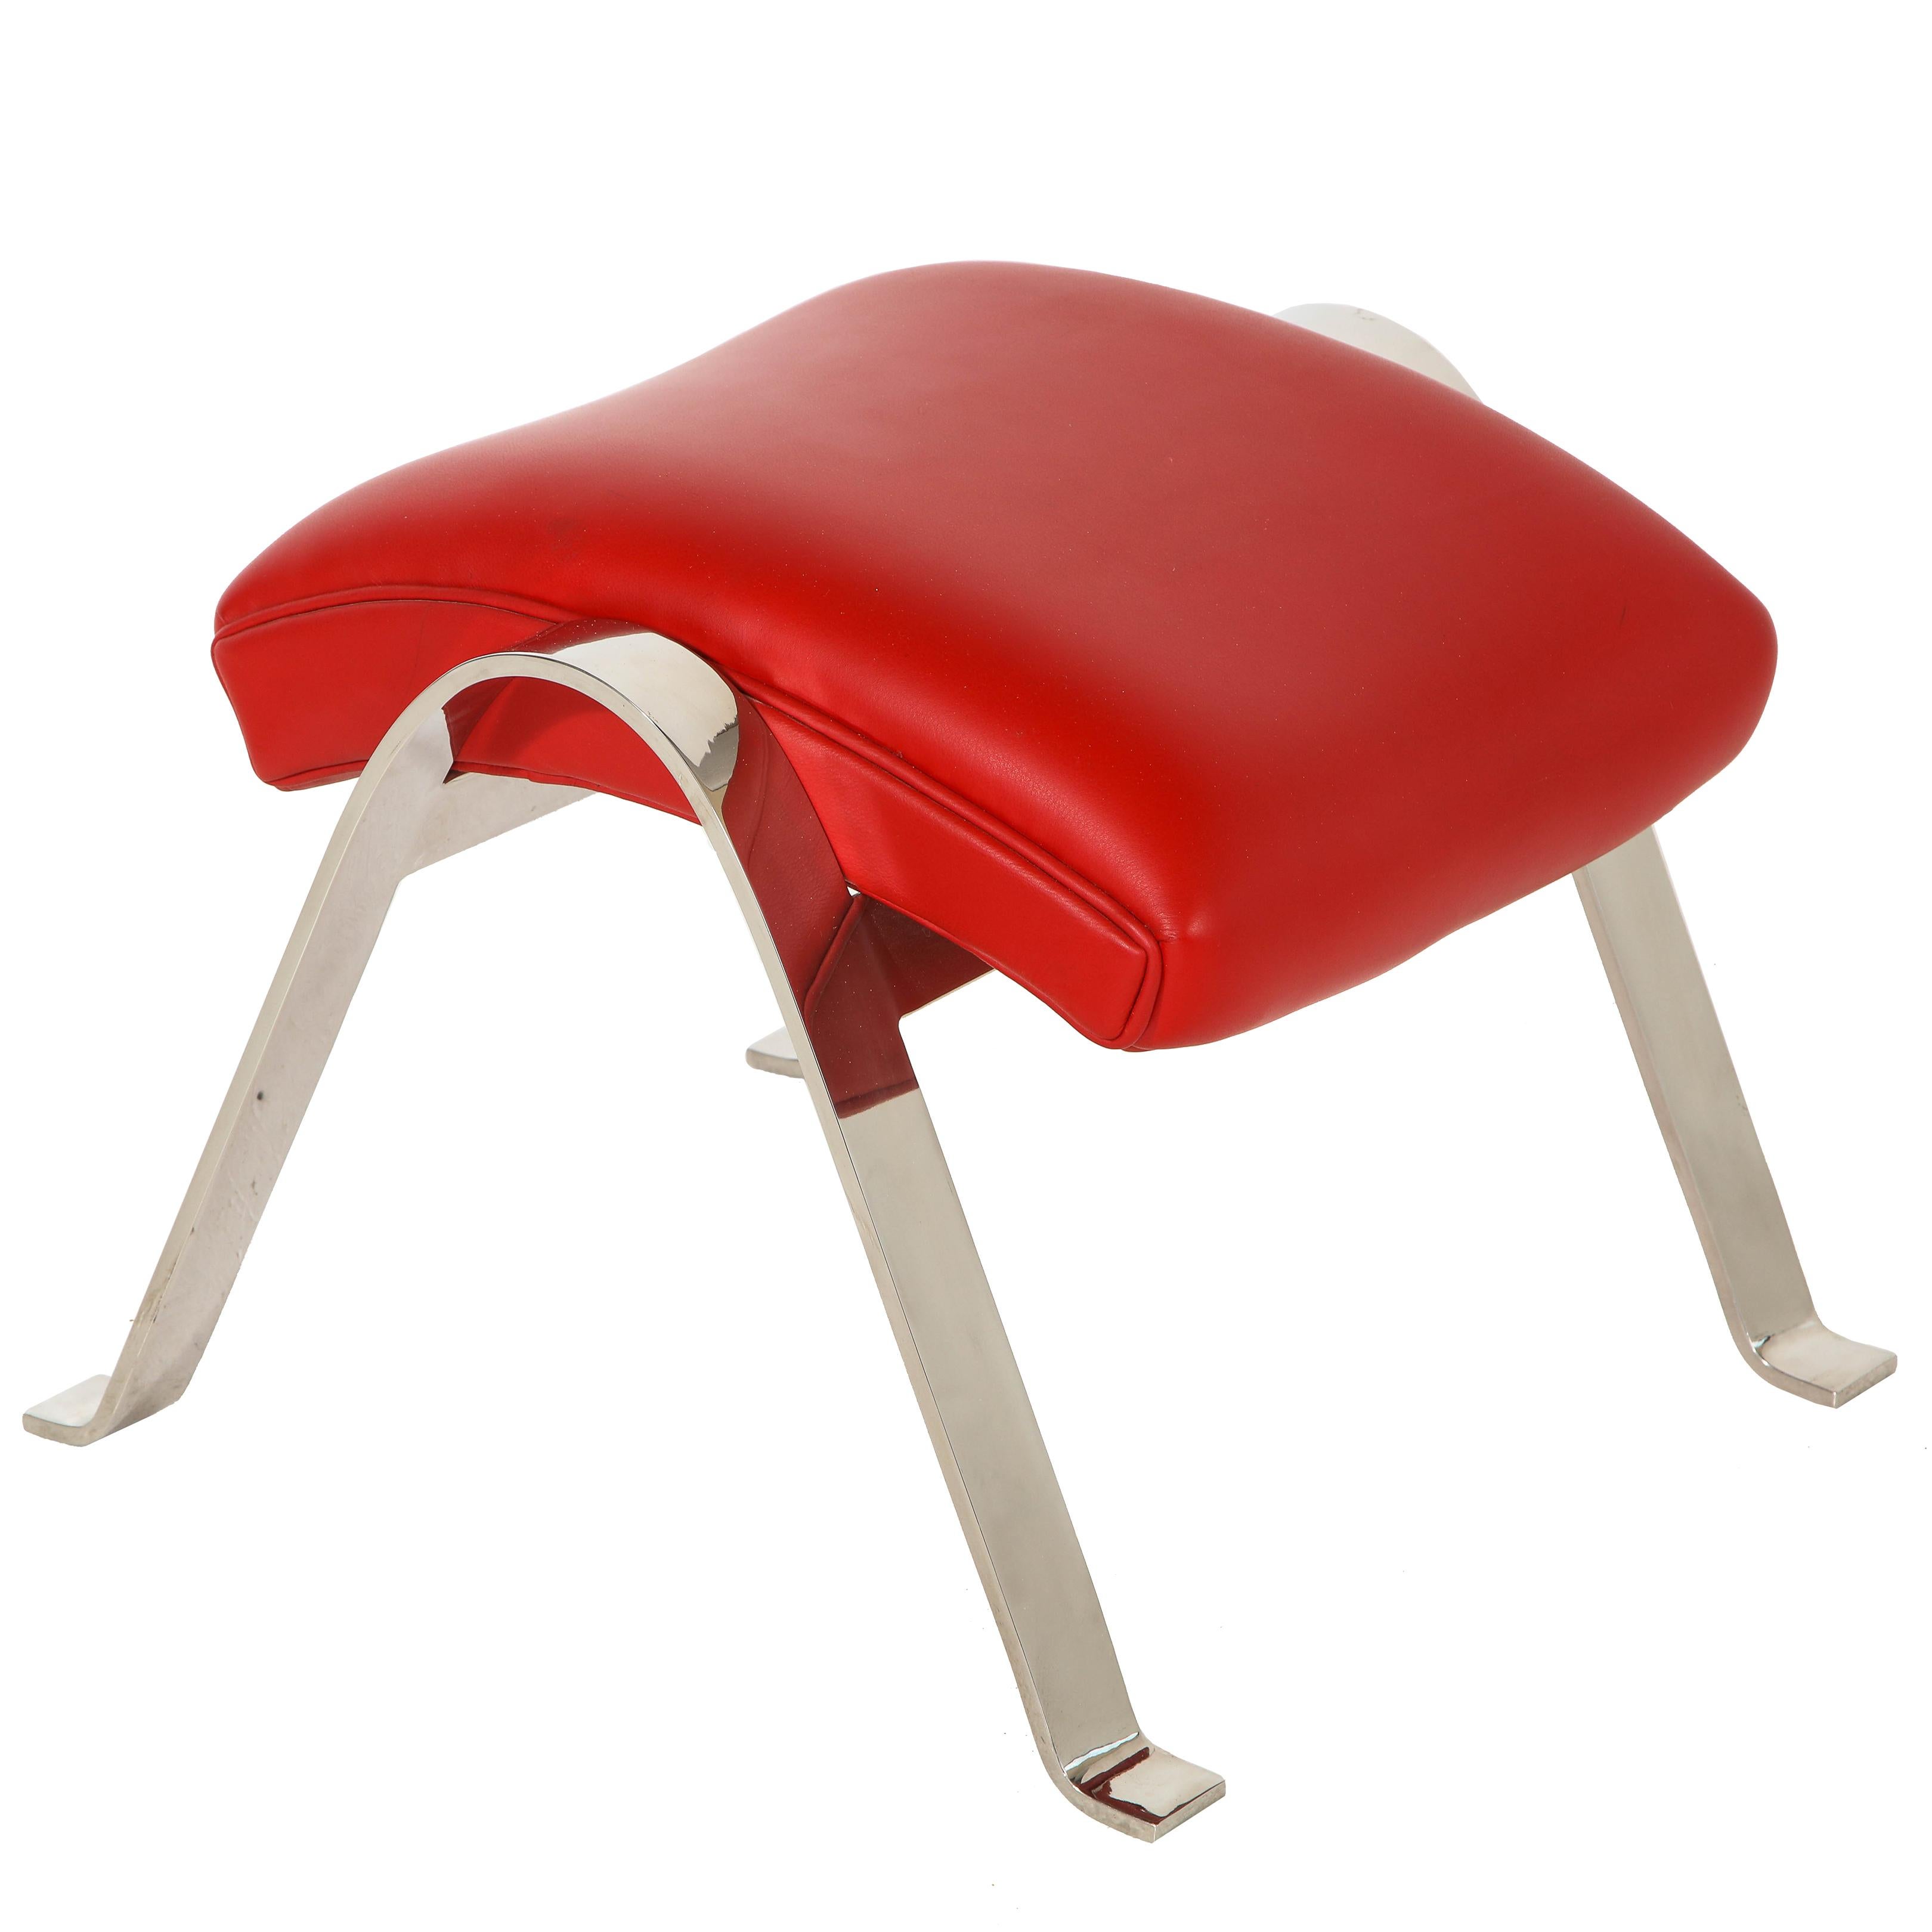 Foot Stool in Red Offered by Vladimir Kagan Design Group For Sale